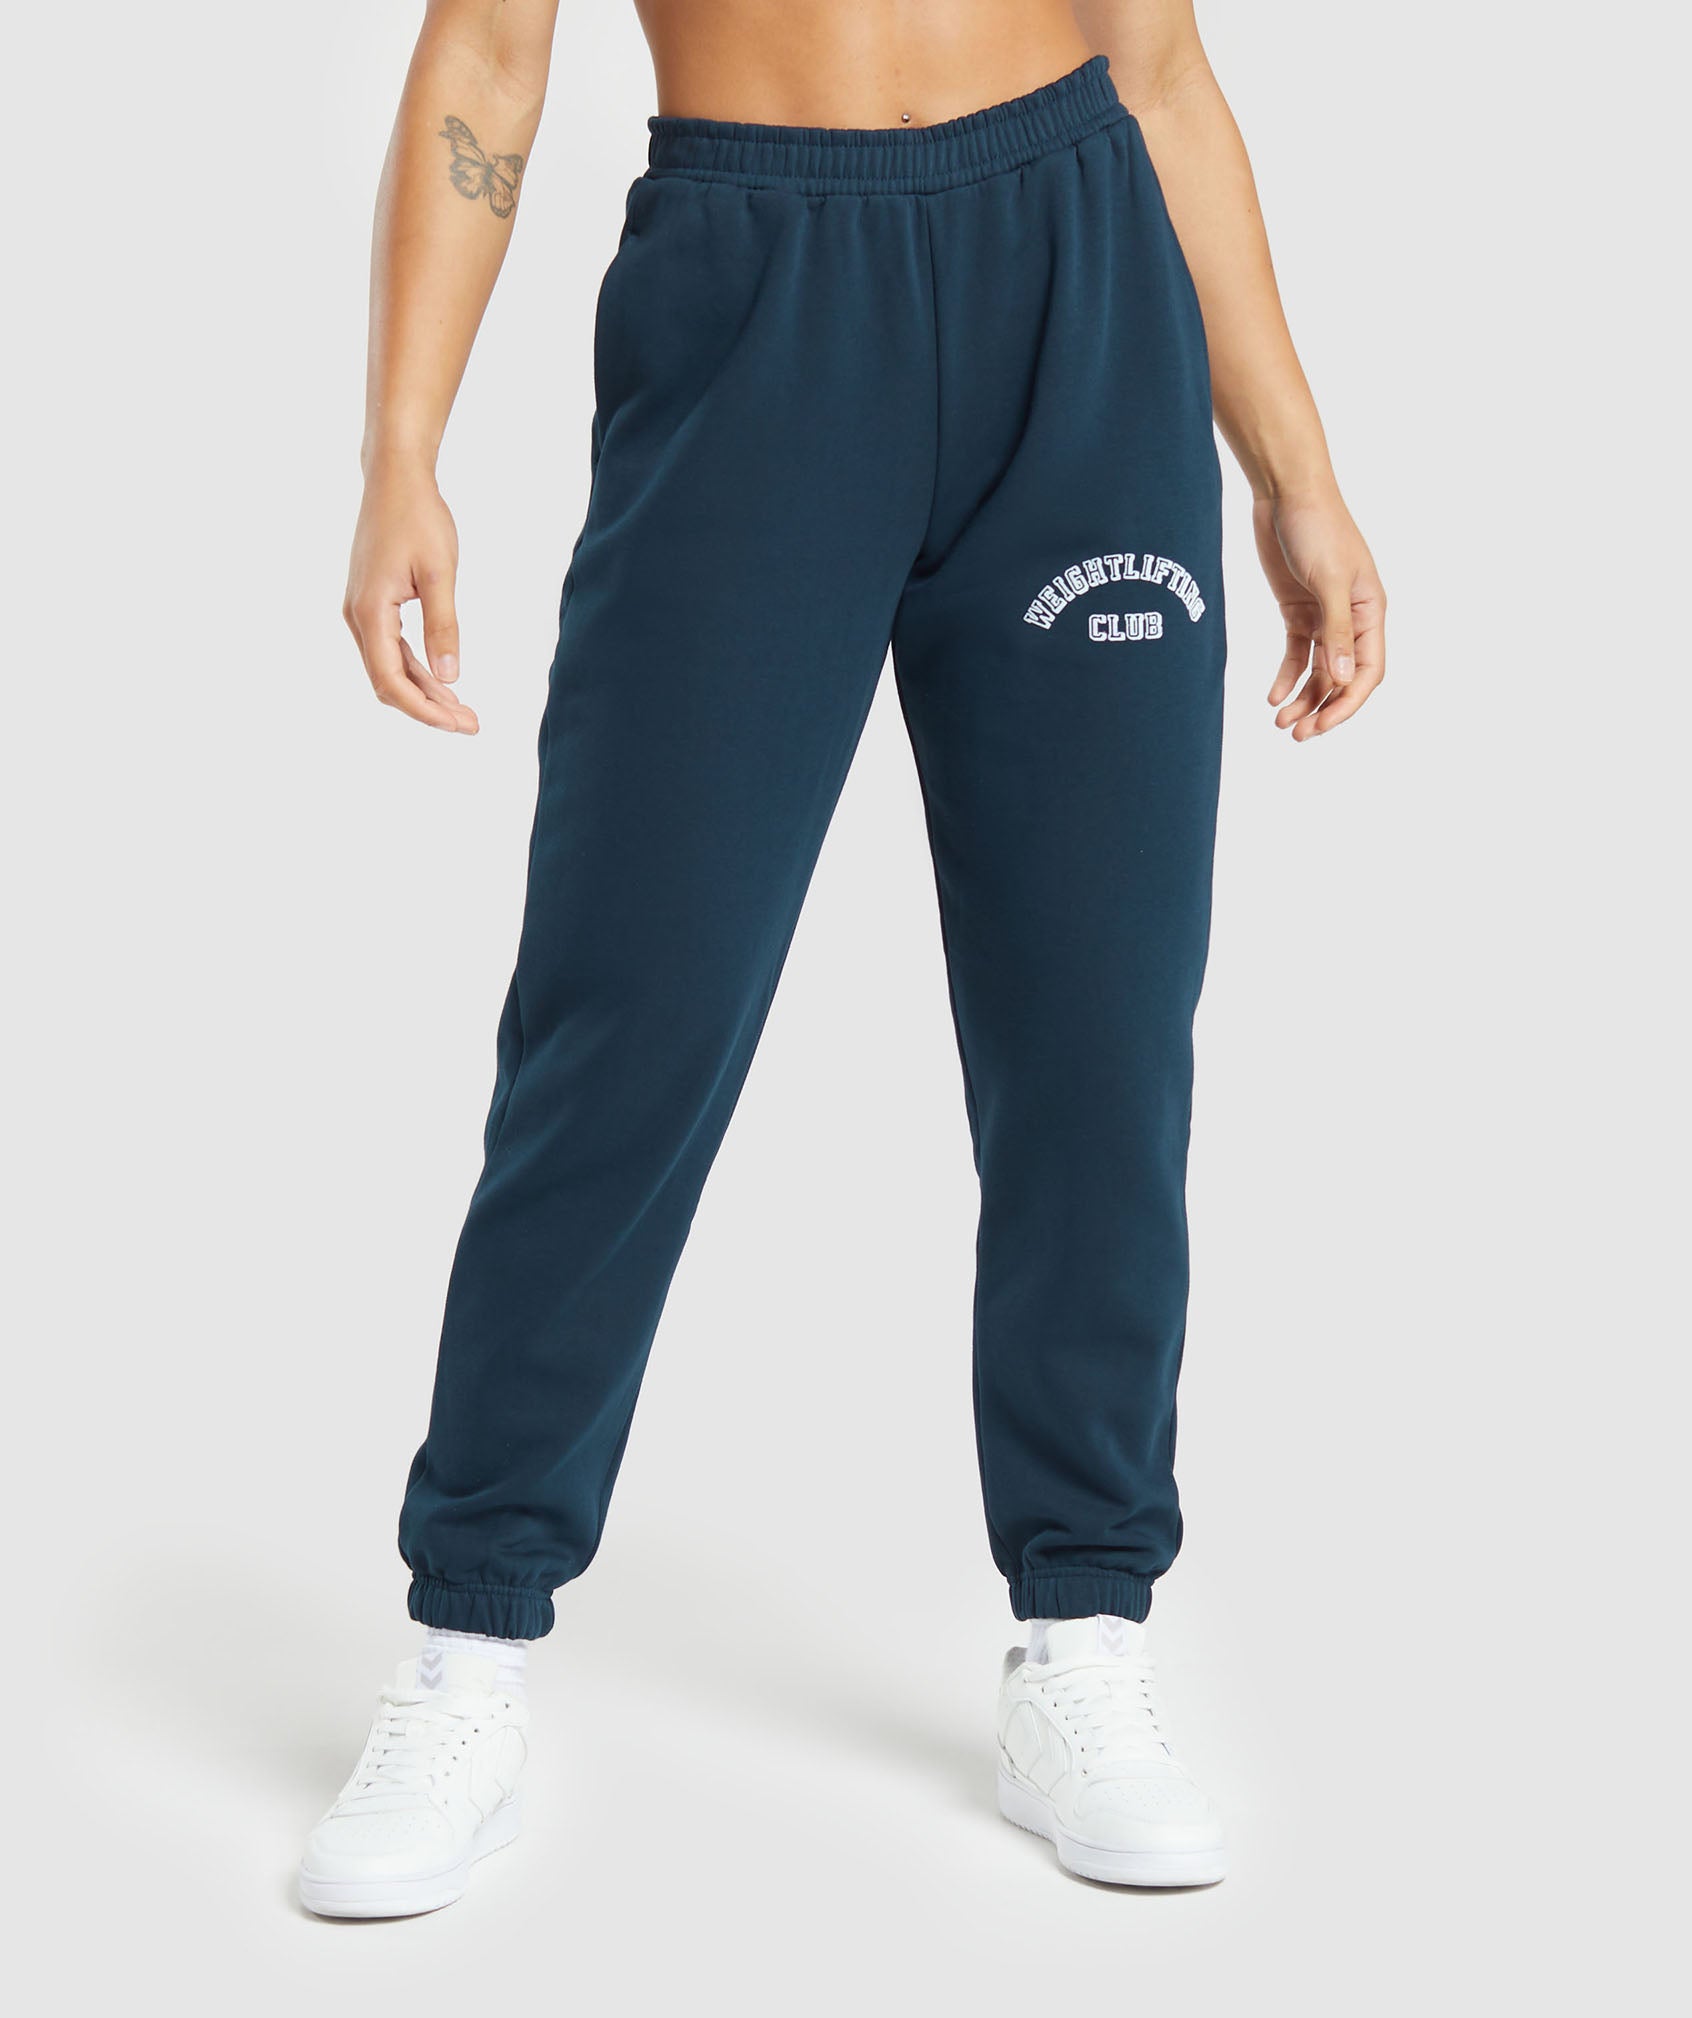 Gymshark Rest Day Sweat Joggers, Women's Fashion, Activewear on Carousell